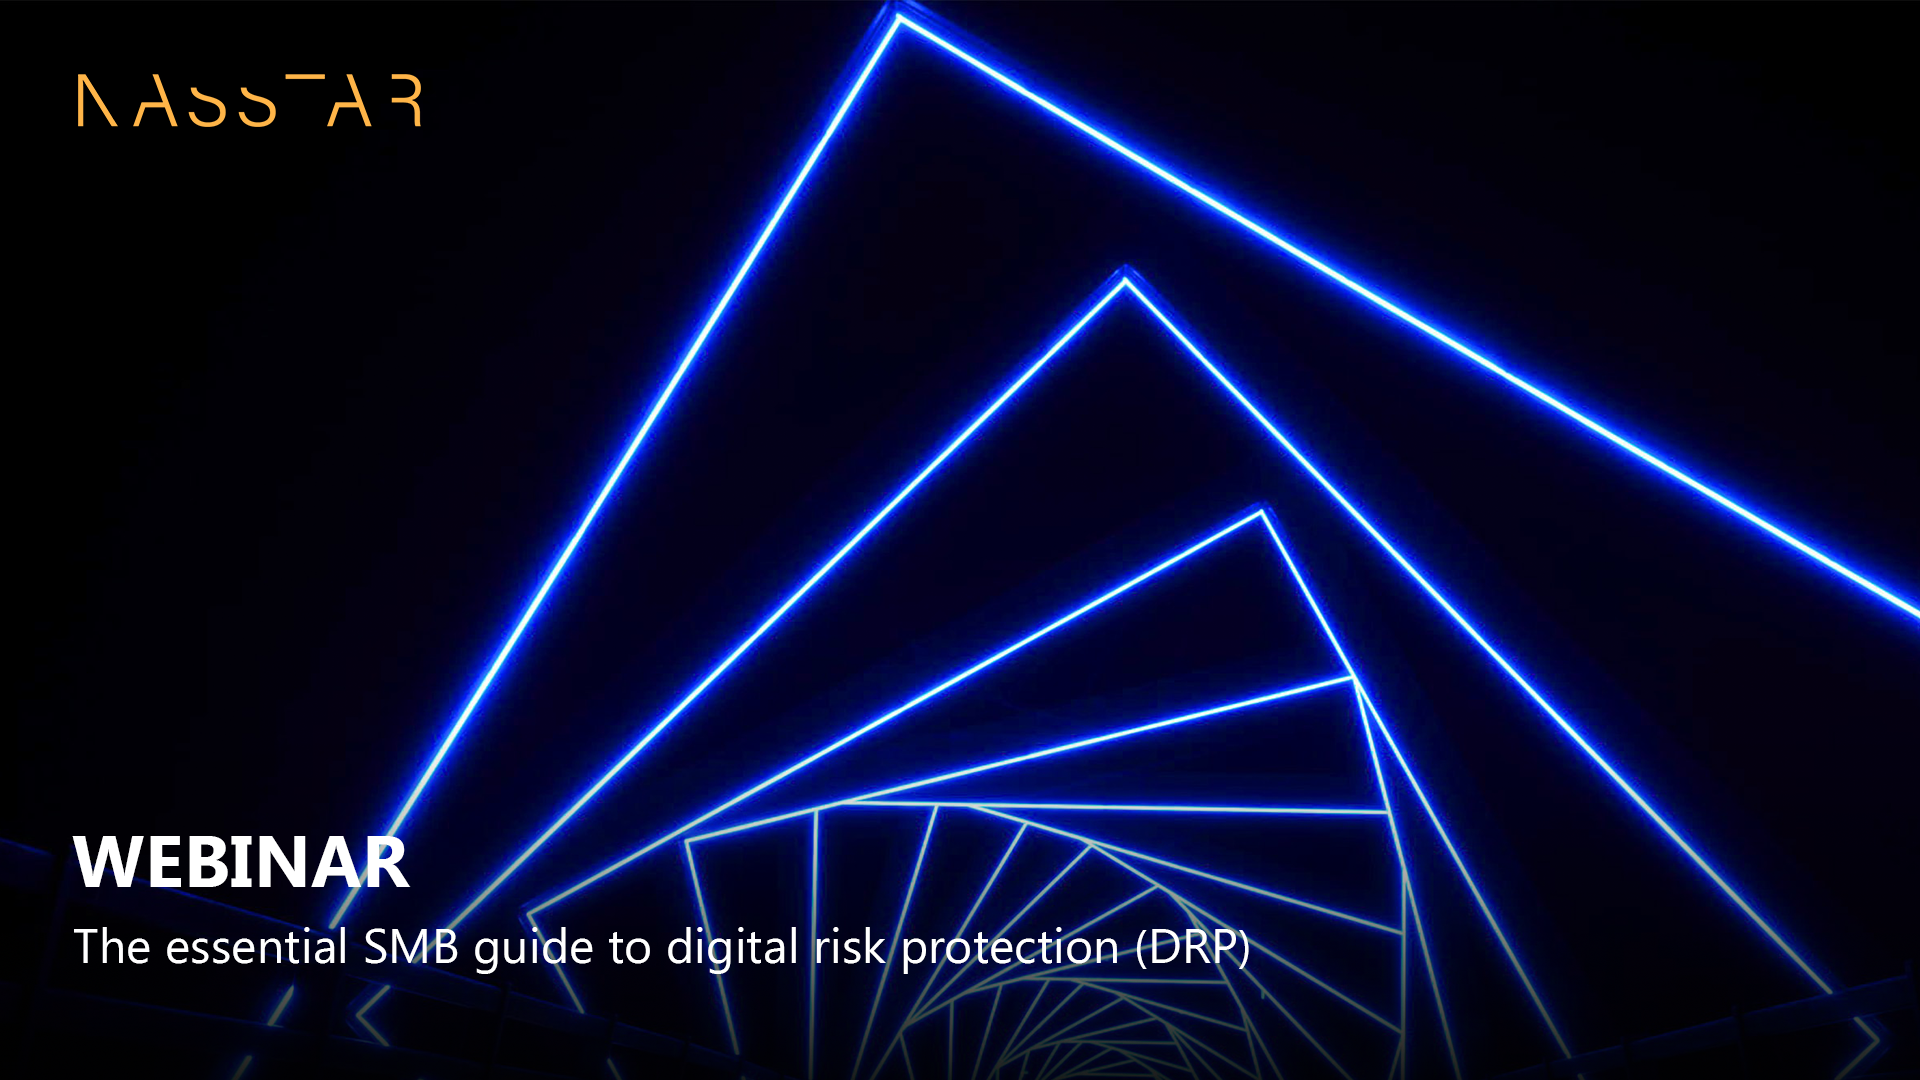 The essential SMB guide to digital risk protection